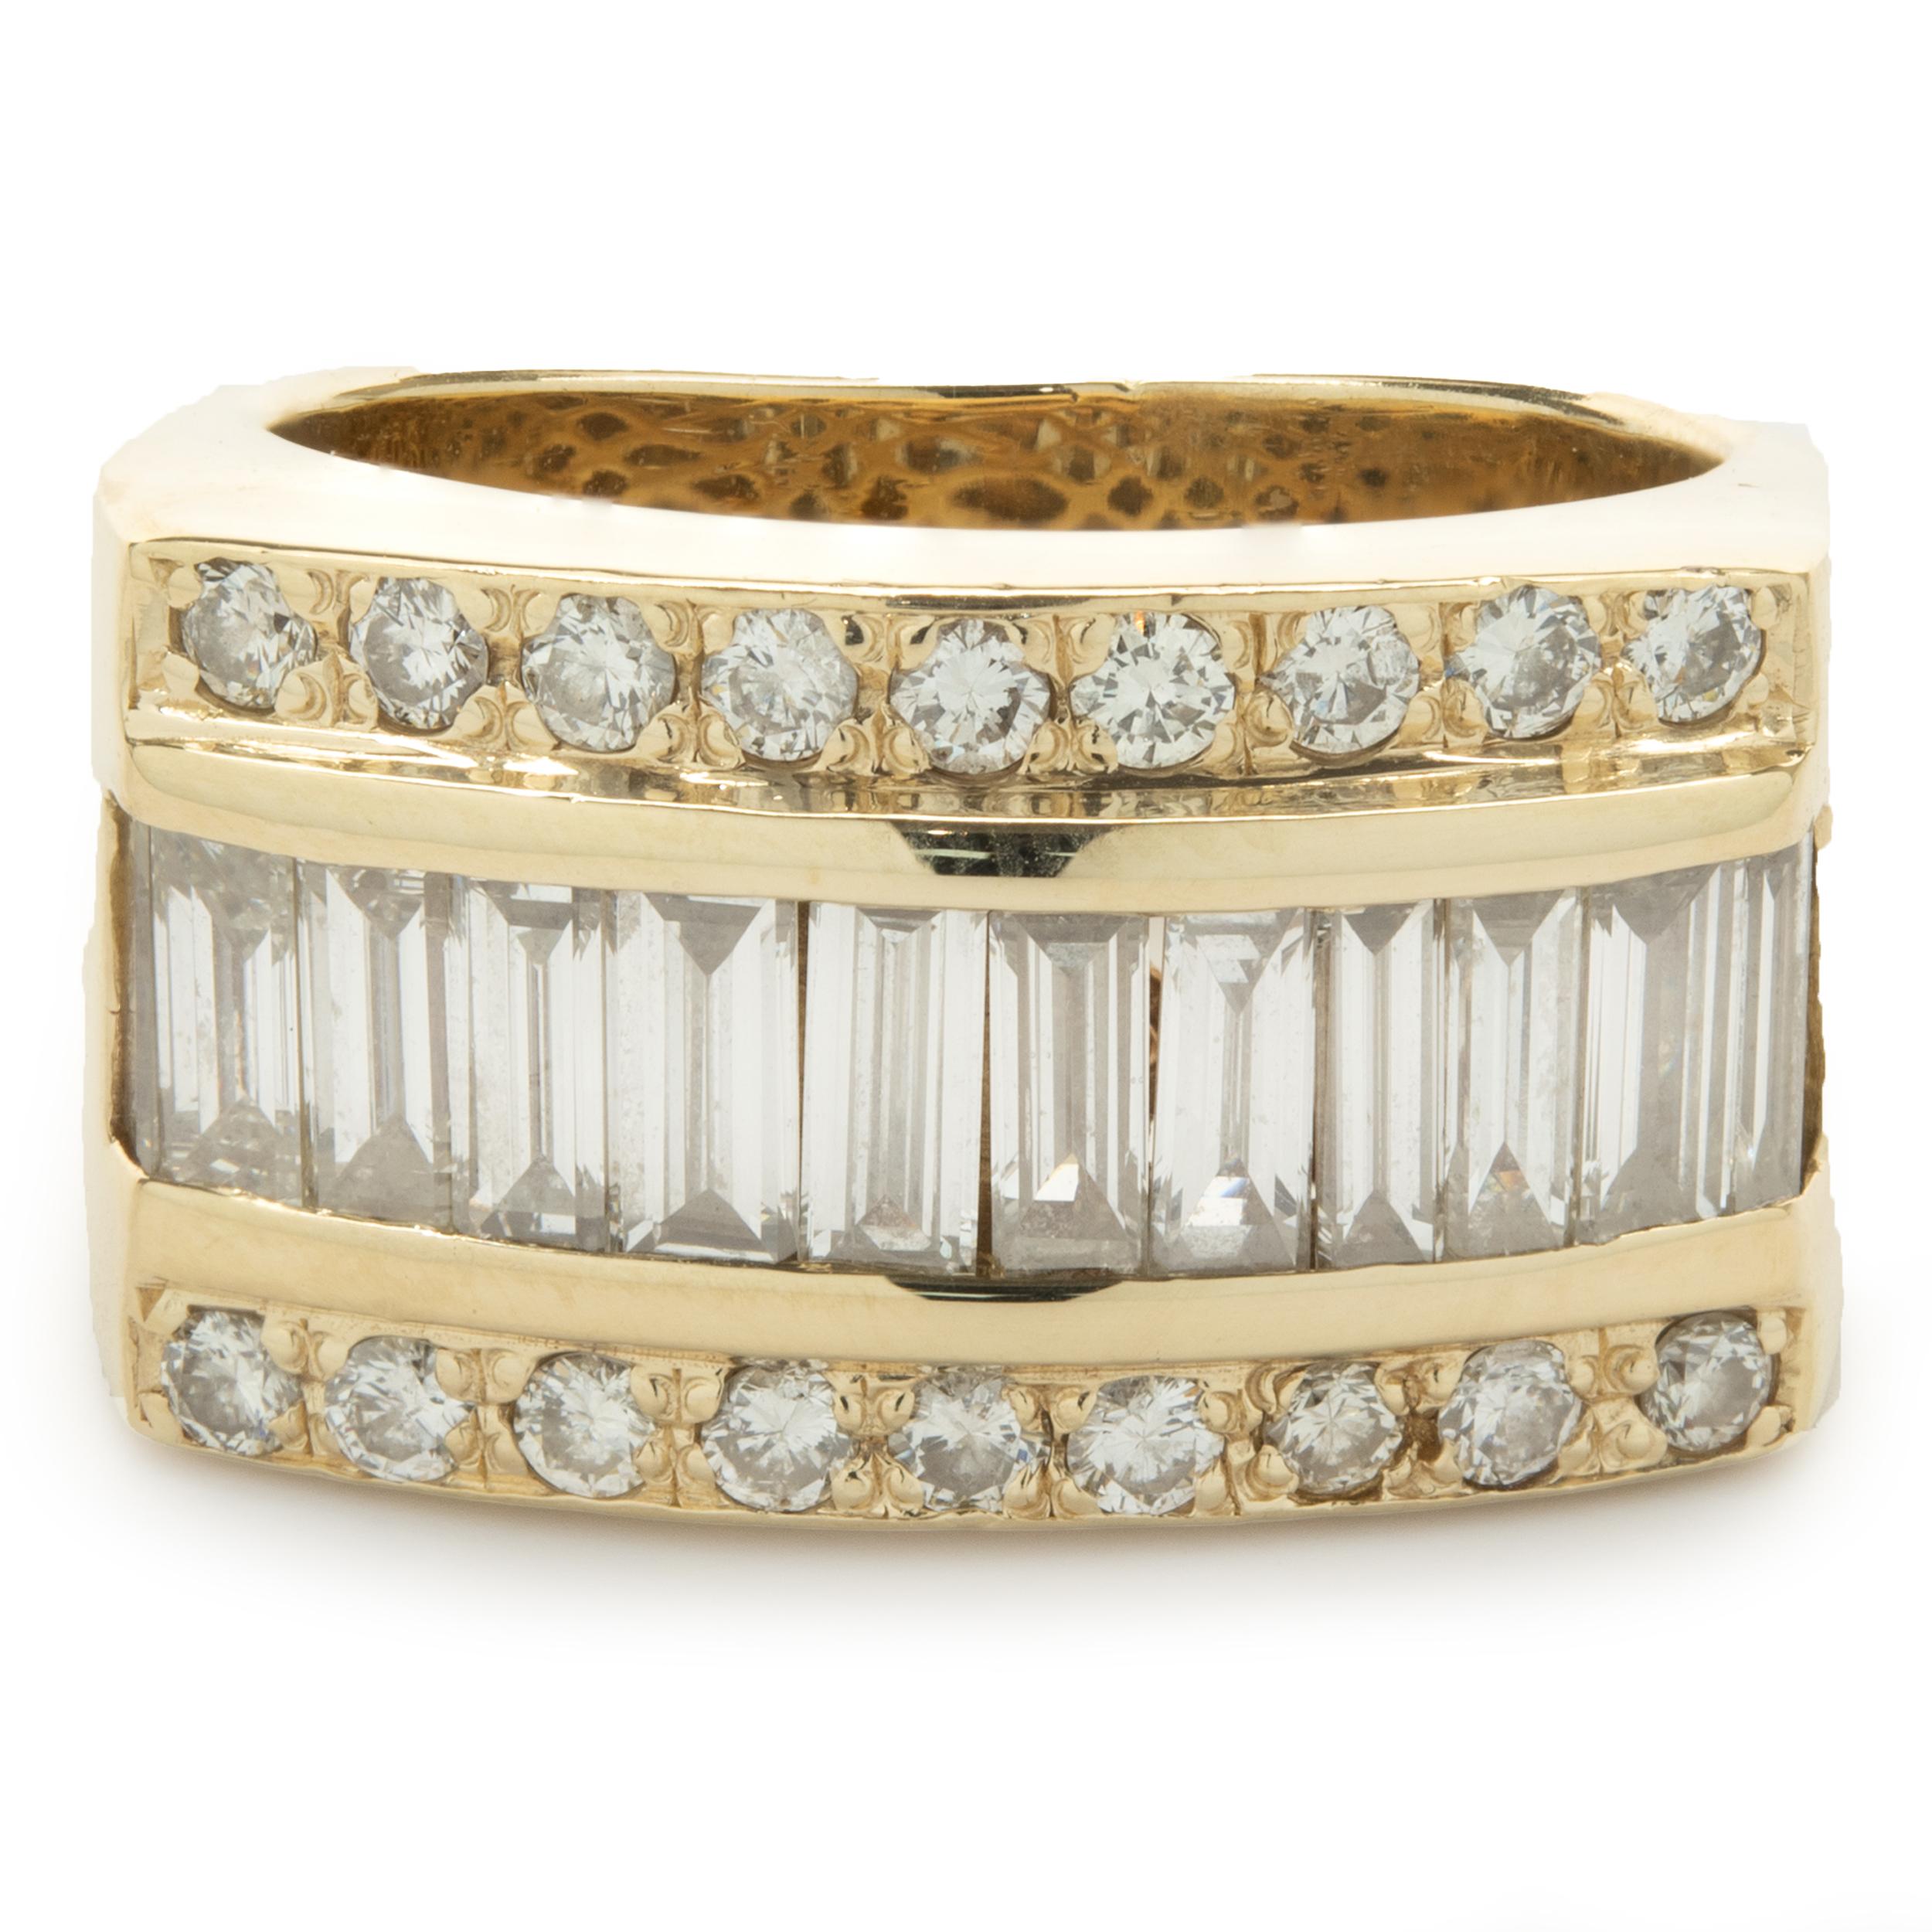 Designer: custom
Material: 14K yellow gold
Diamond: 11 baguette cut = 2.20cttw
Color: H
Clarity: SI1
Diamond: 18 round brilliant cut = .36cttw
Color: H
Clarity: SI1
Ring size: 6.5 (please allow two additional shipping days for sizing